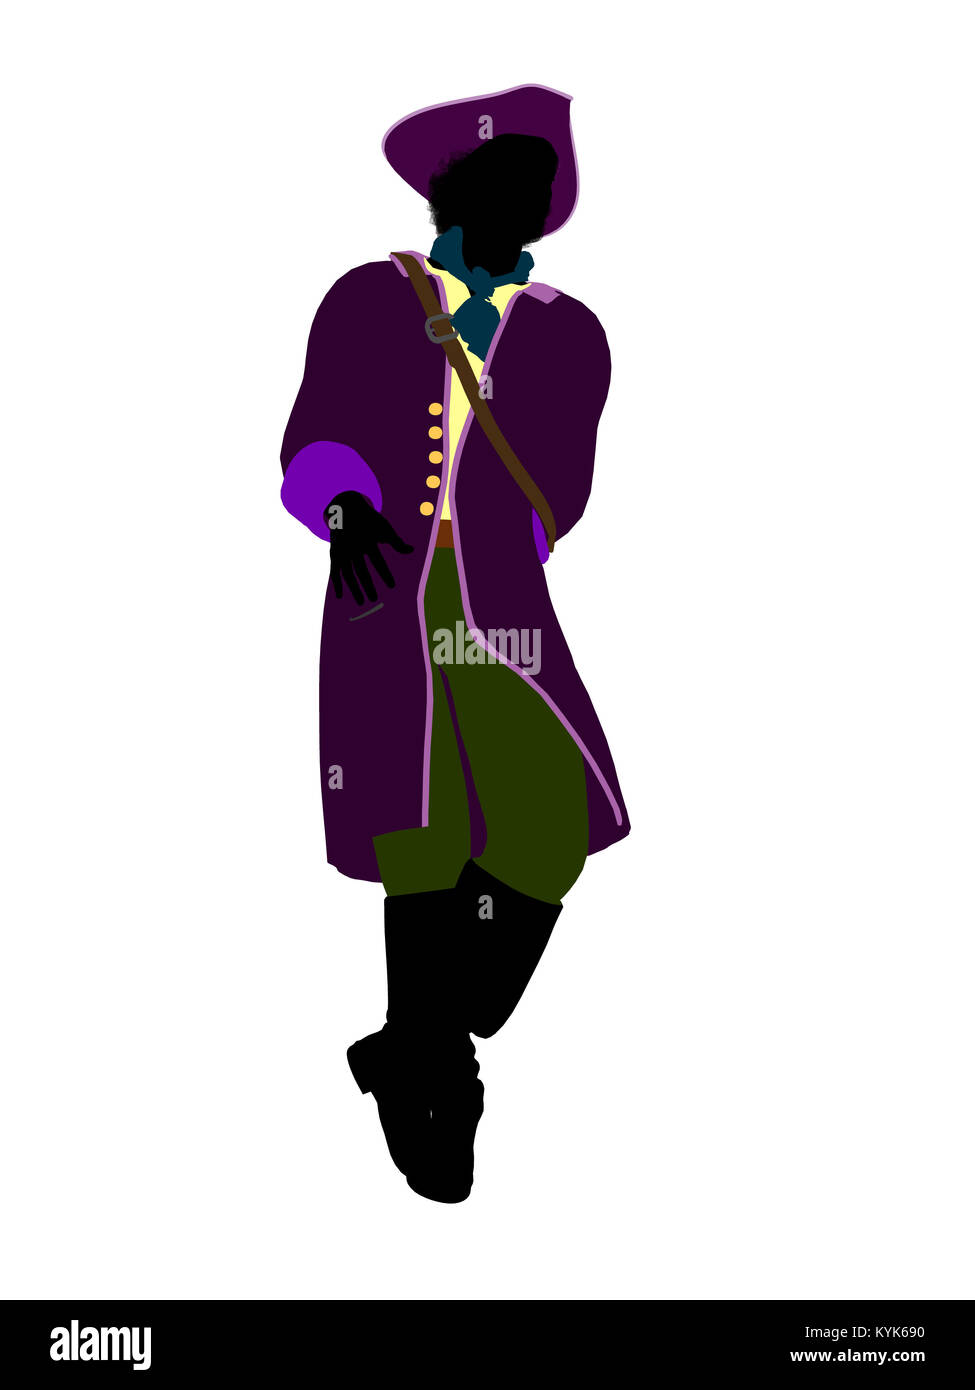 Captain hook illustration silhouette on a white background Stock Photo